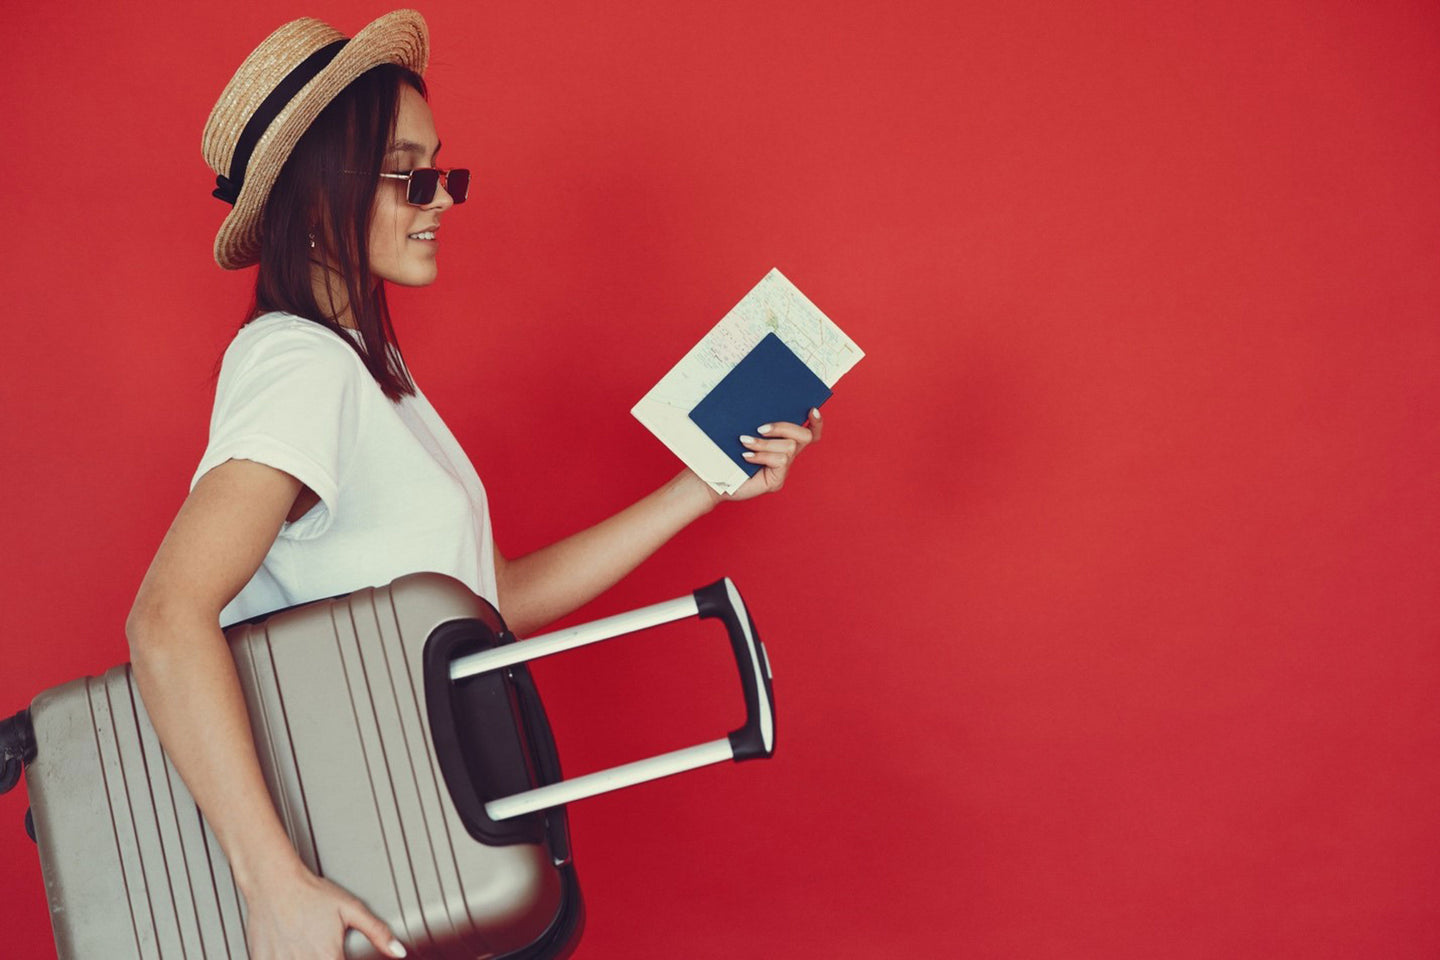 How to Pack Light: 10 Tips for Women Traveling on a Trip